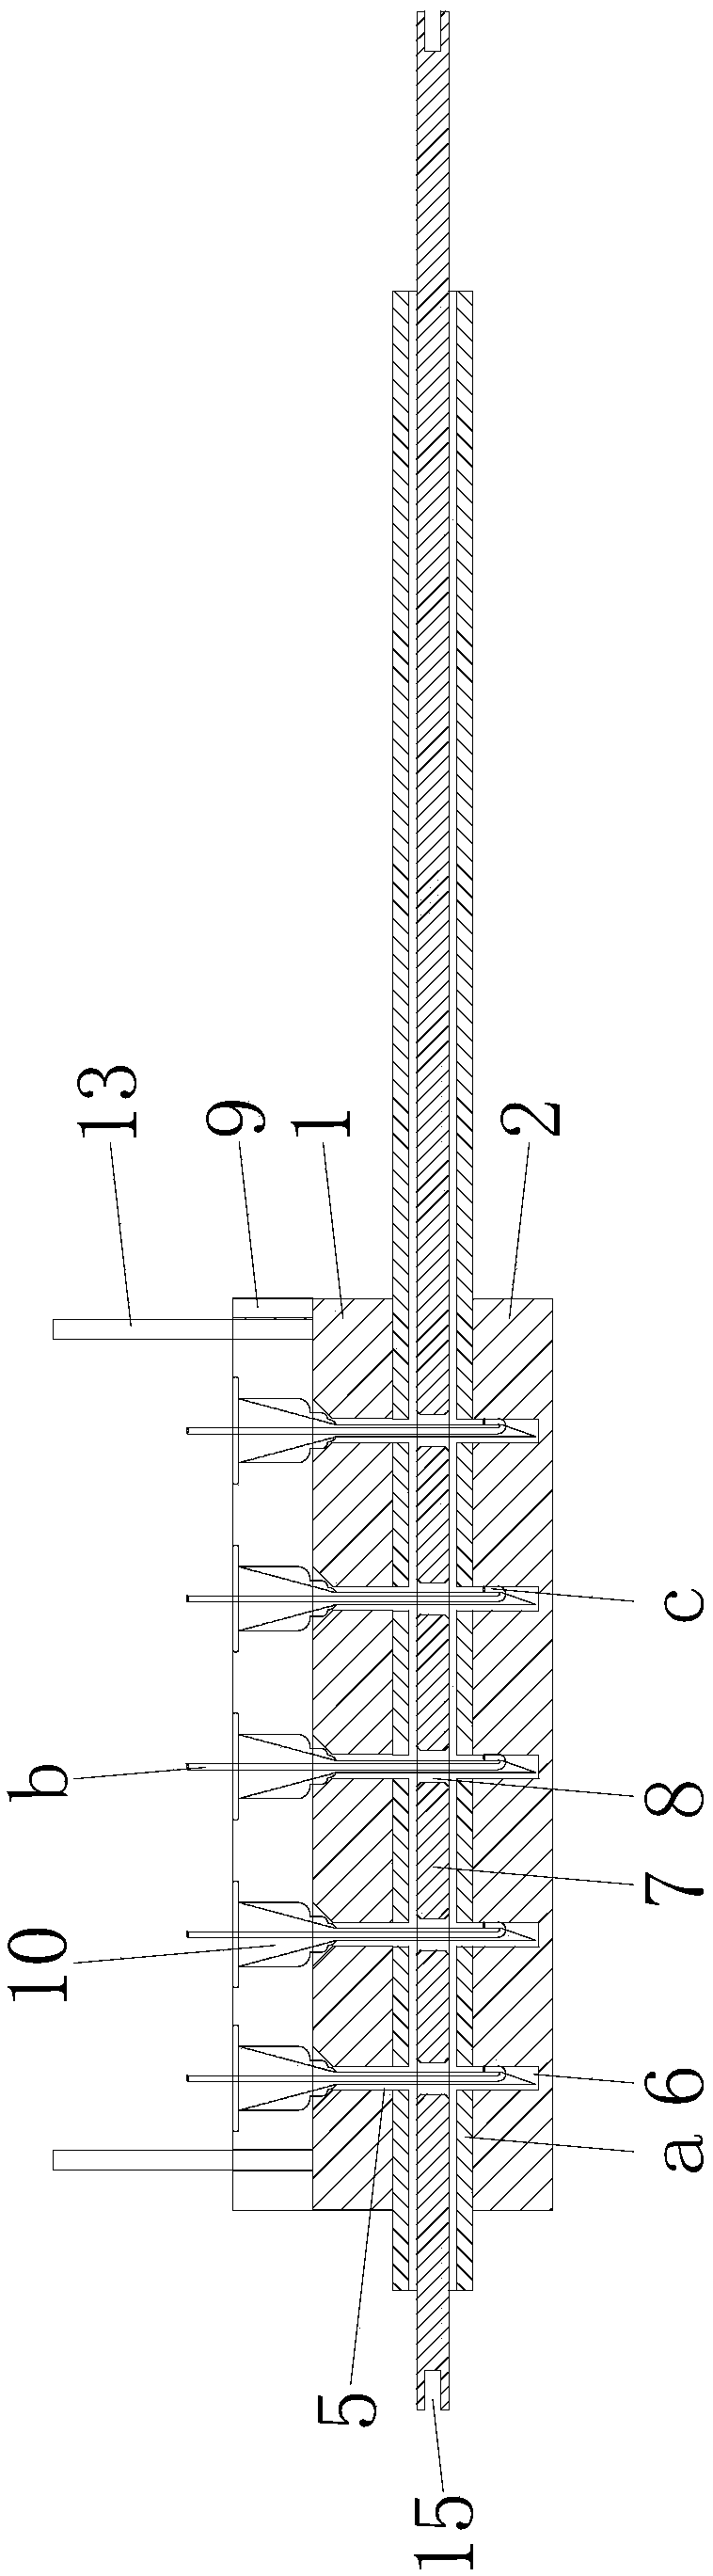 A device and a method for laying a lead by an electrode cathete